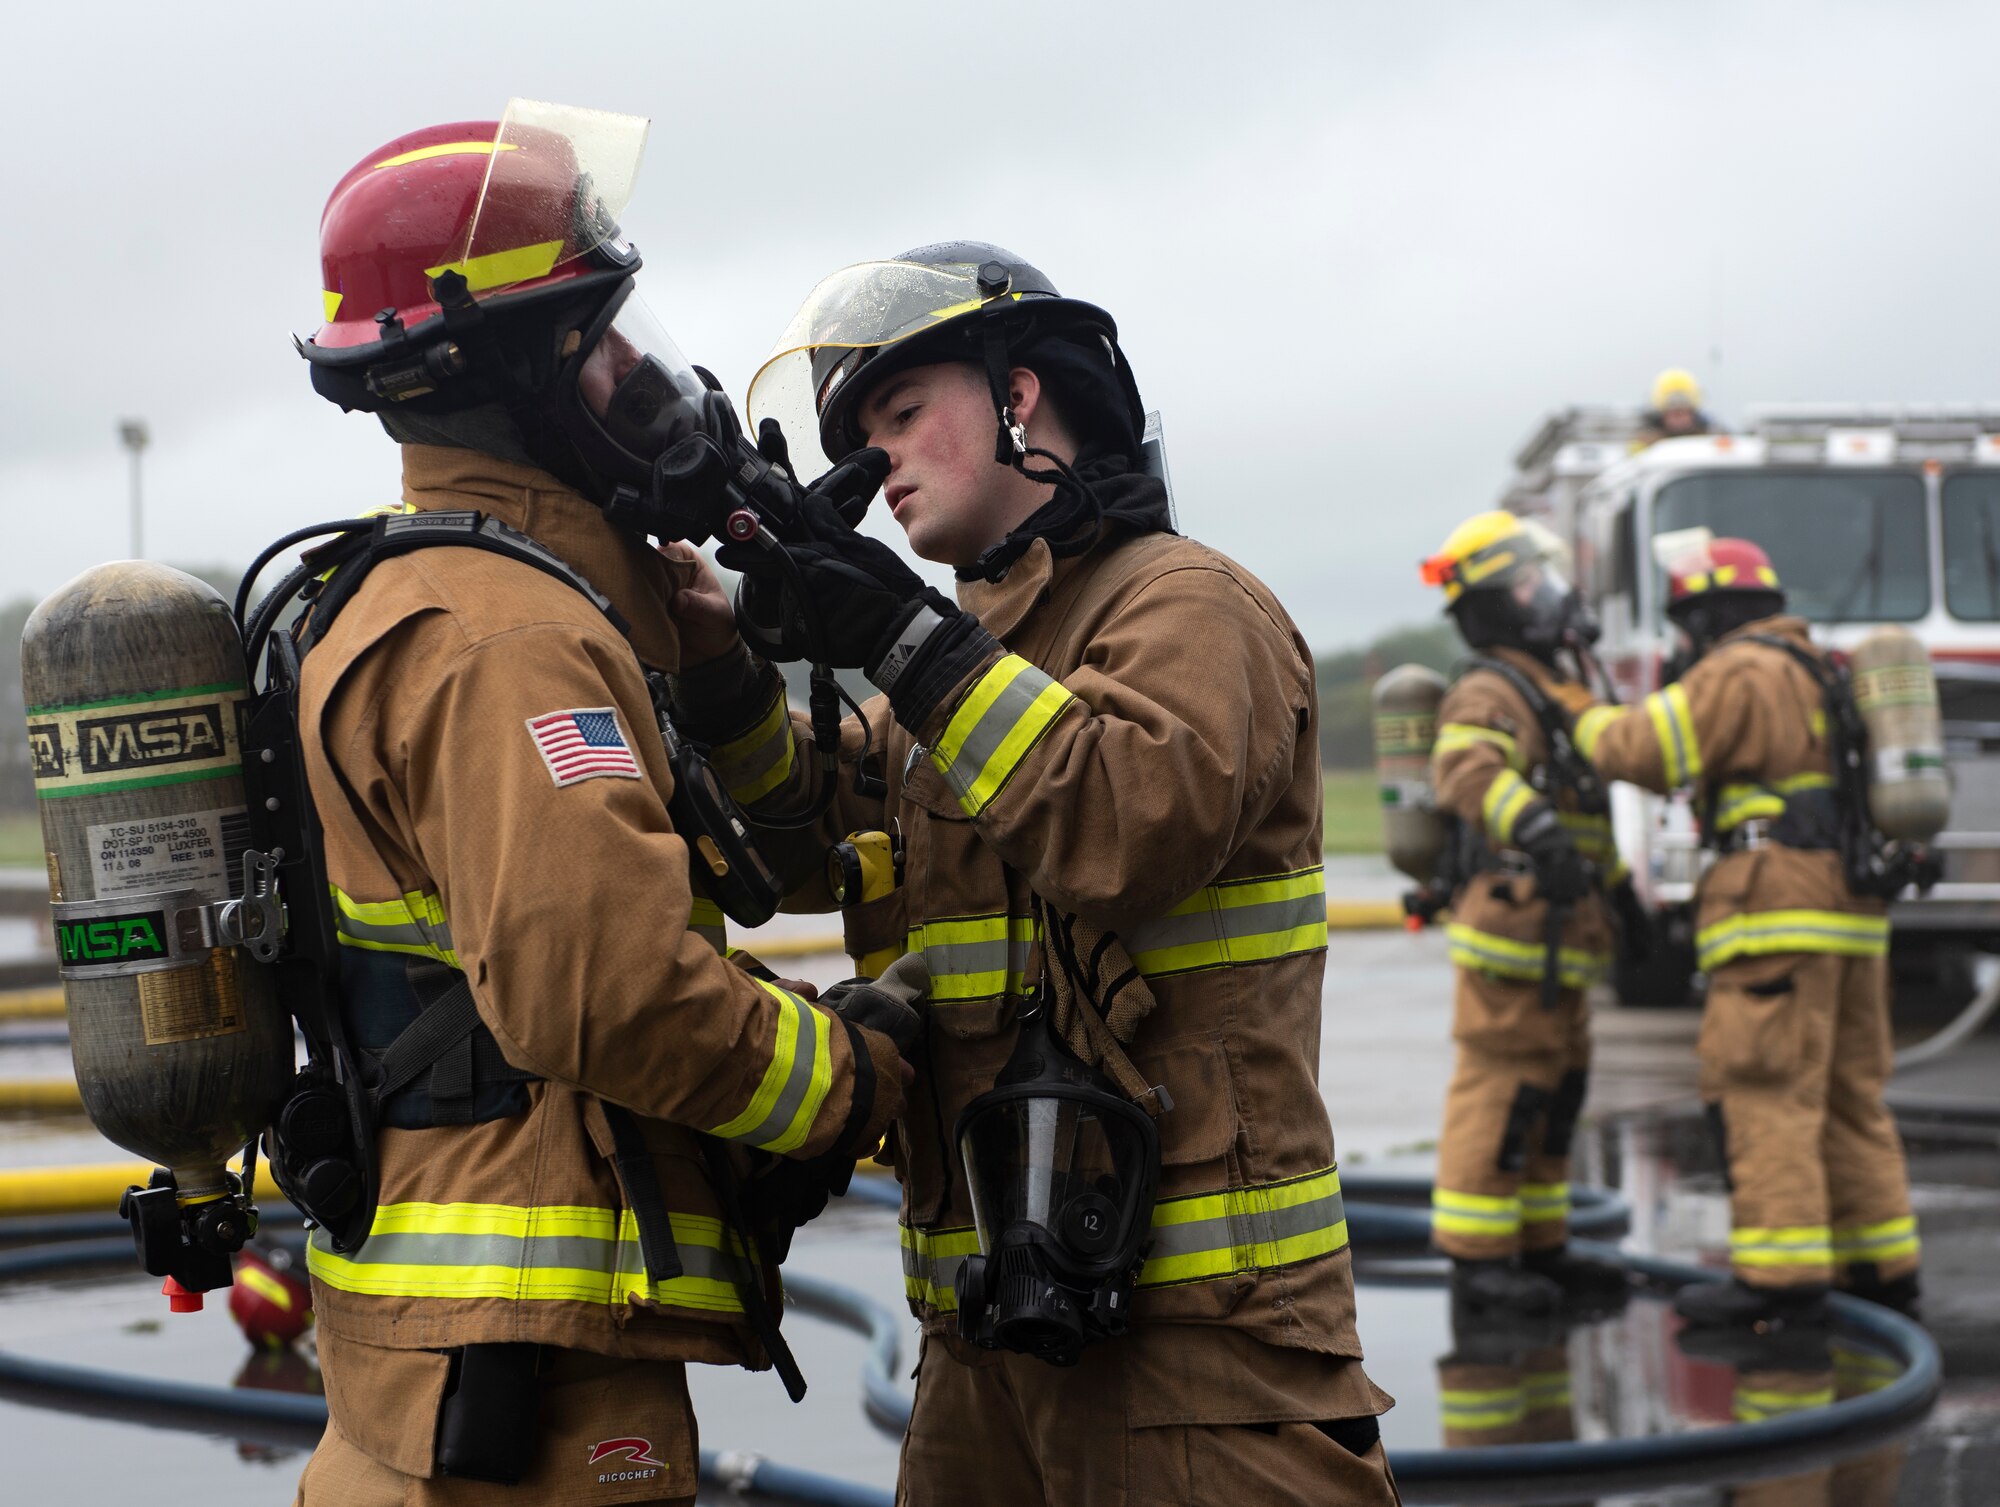 U.S. Air Force firefighters assigned to the 48th Civil Engineering Squadron perform buddy checks on their personal protective equipment prior to a controlled burn training exercise at Royal Air Force Lakenheath, England, July 8, 2020. Structural training exercises allow Liberty Wing firefighters to improve communication and teamwork in low visibility, high stress environments. (U.S. Air Force photo by Airman 1st Class Jessi Monte)